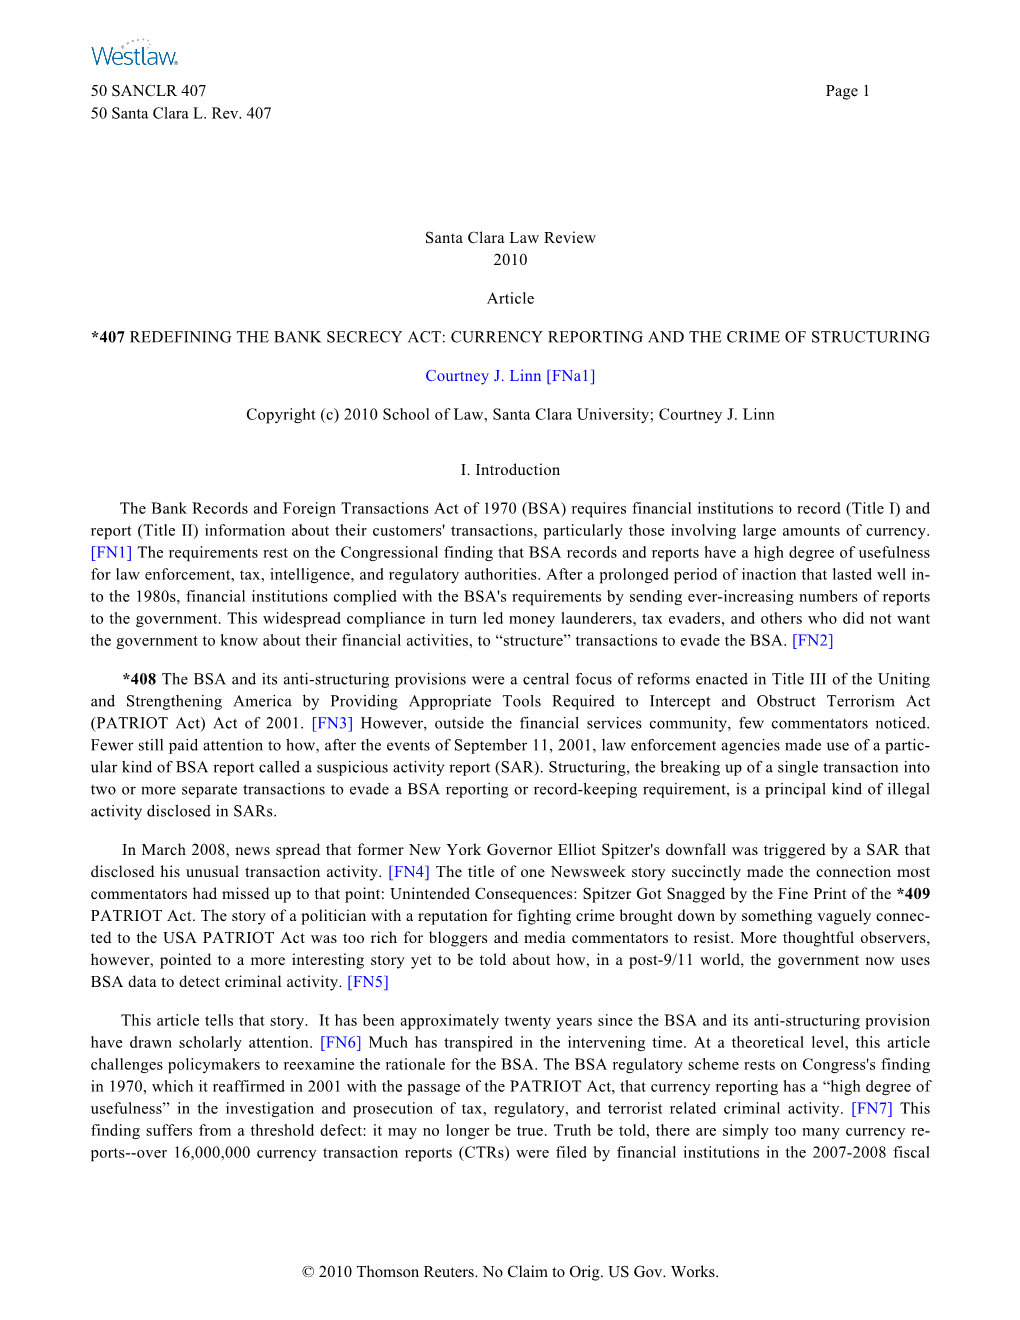 Redefining the Bank Secrecy Act: Currency Reporting and the Crime of Structuring